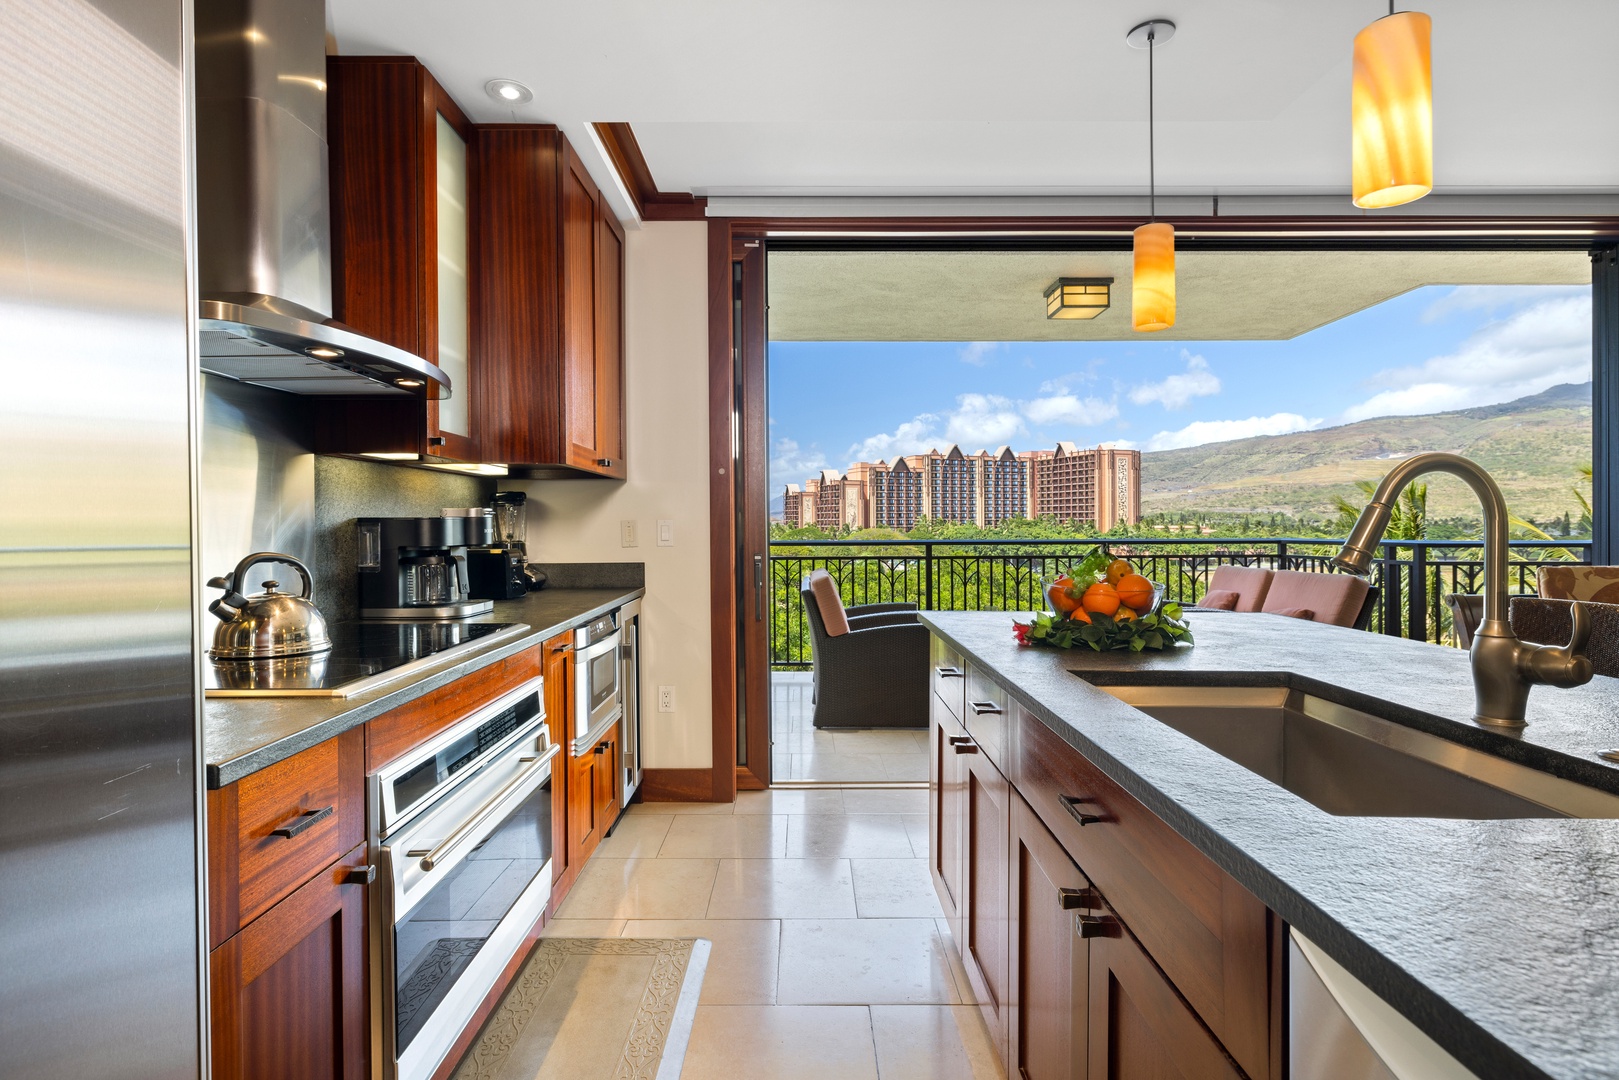 Kapolei Vacation Rentals, Ko Olina Beach Villas B602 - The kitchen features stainless steel appliances and opens up to a living area for easy entertaining.